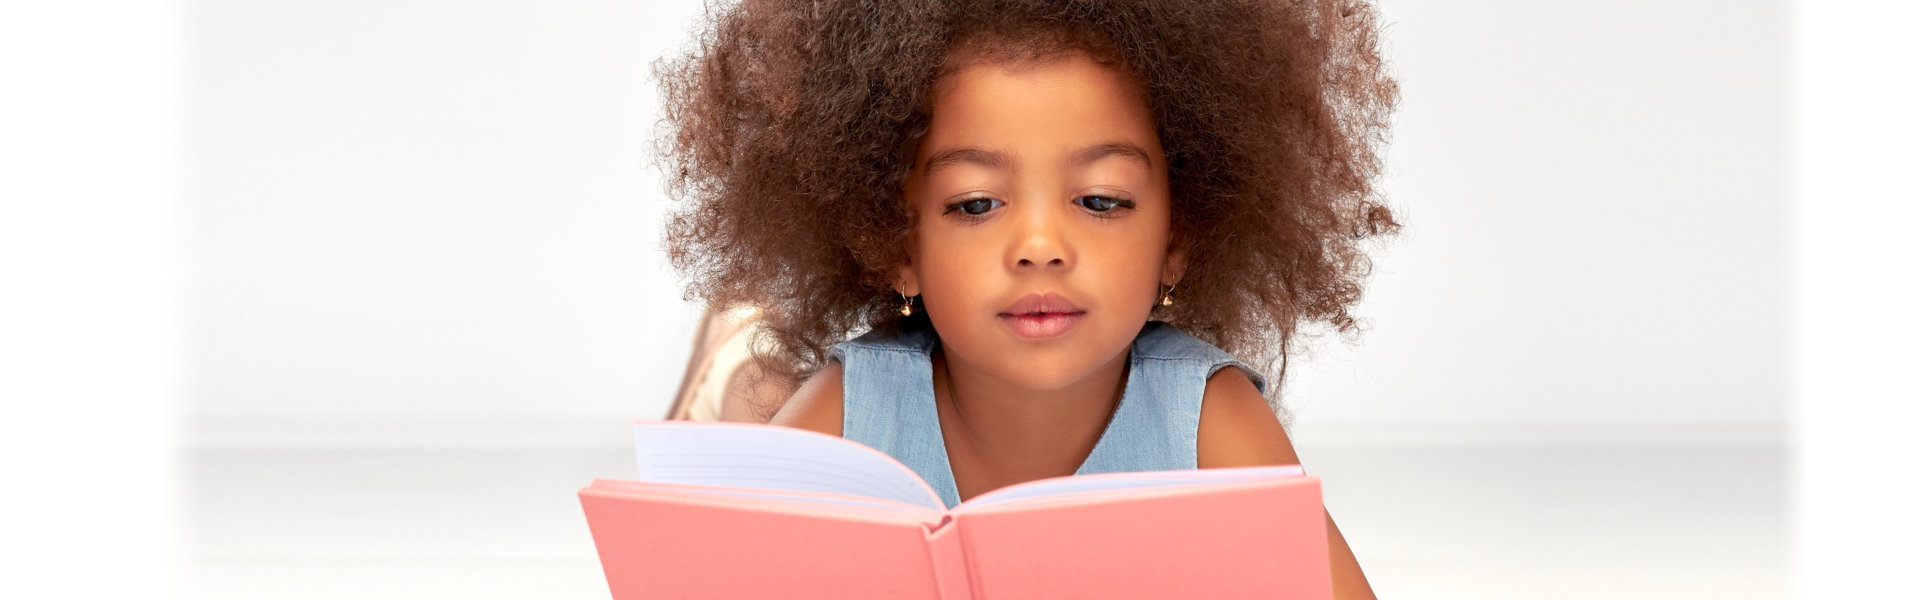 A young girl reading book